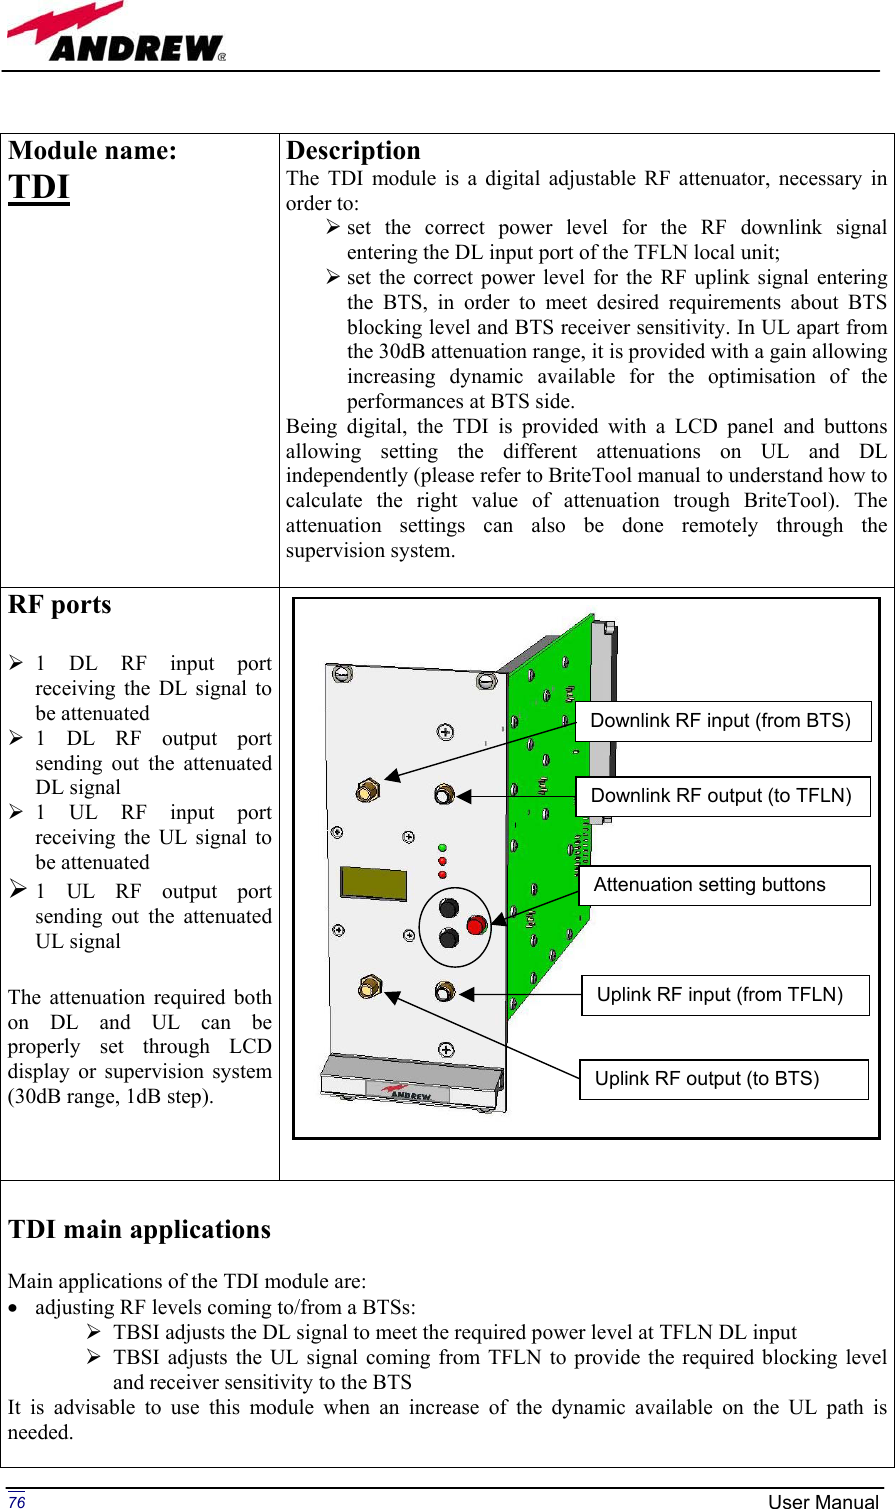 Page 76 of Andrew Wireless Innovations Group BCP-TFAM23 Model TFAM23 Downlink Booster User Manual MN024 04 rev3